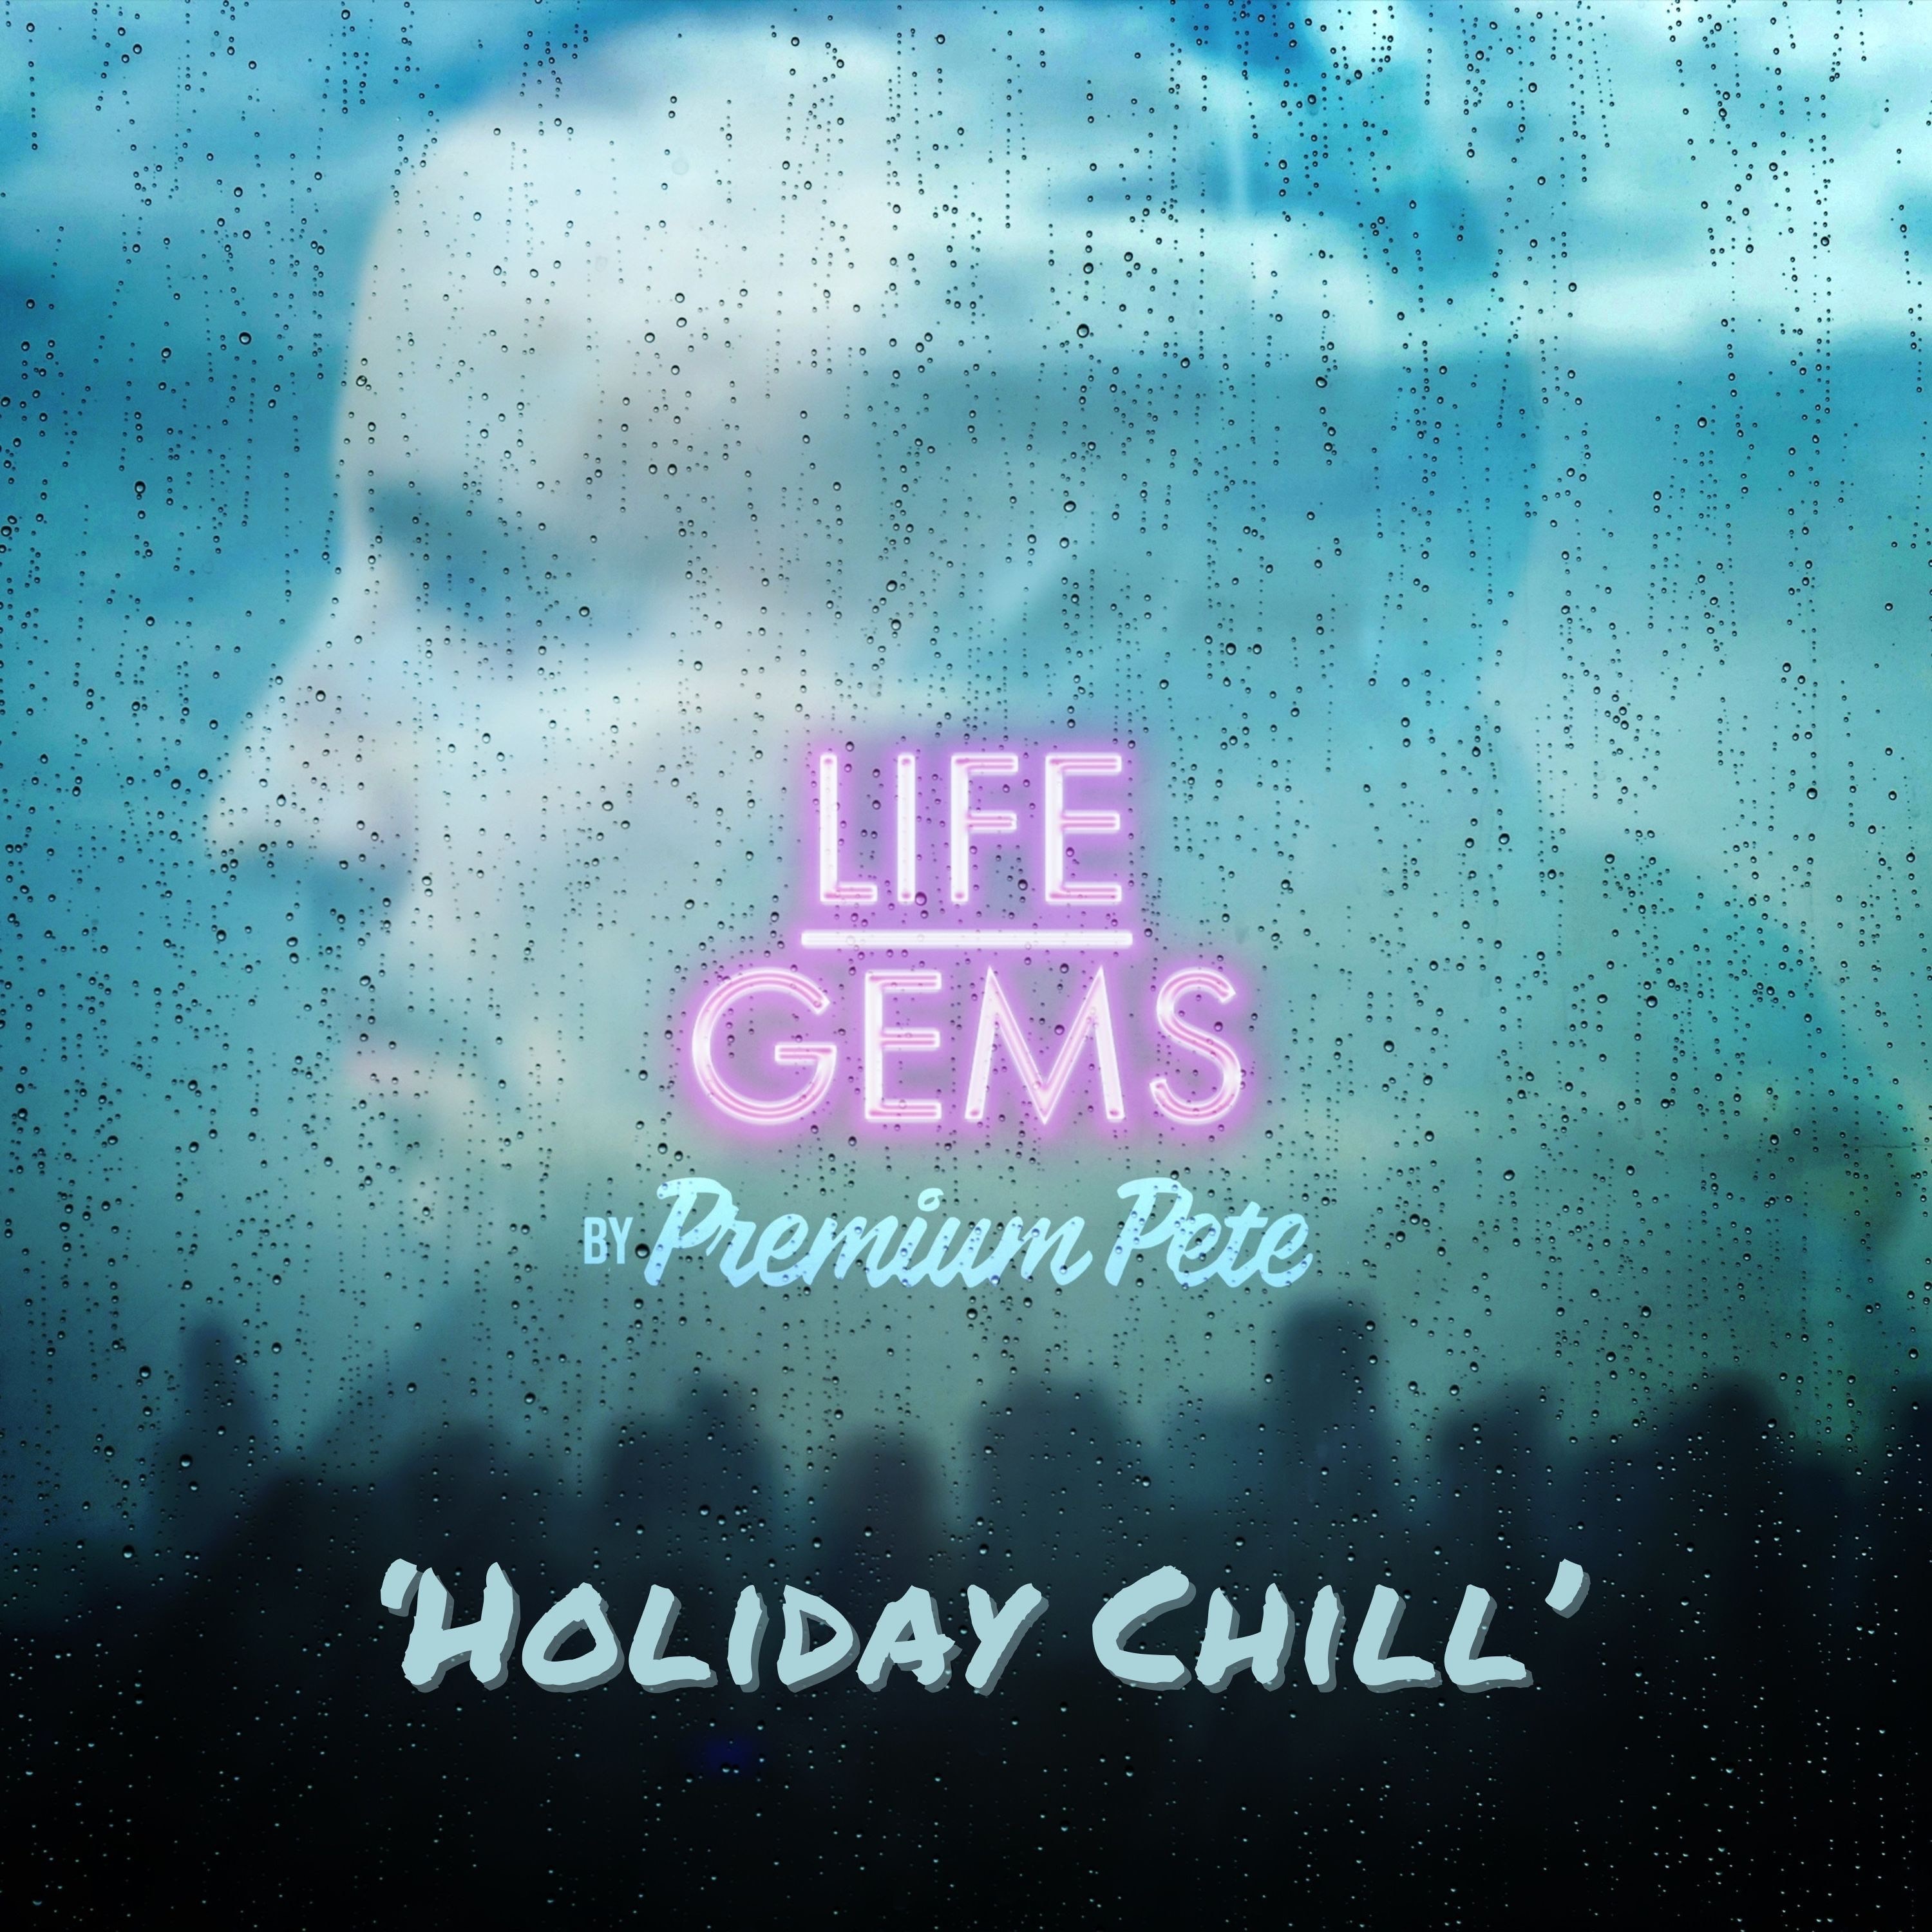 Life Gems "Holiday Chill"